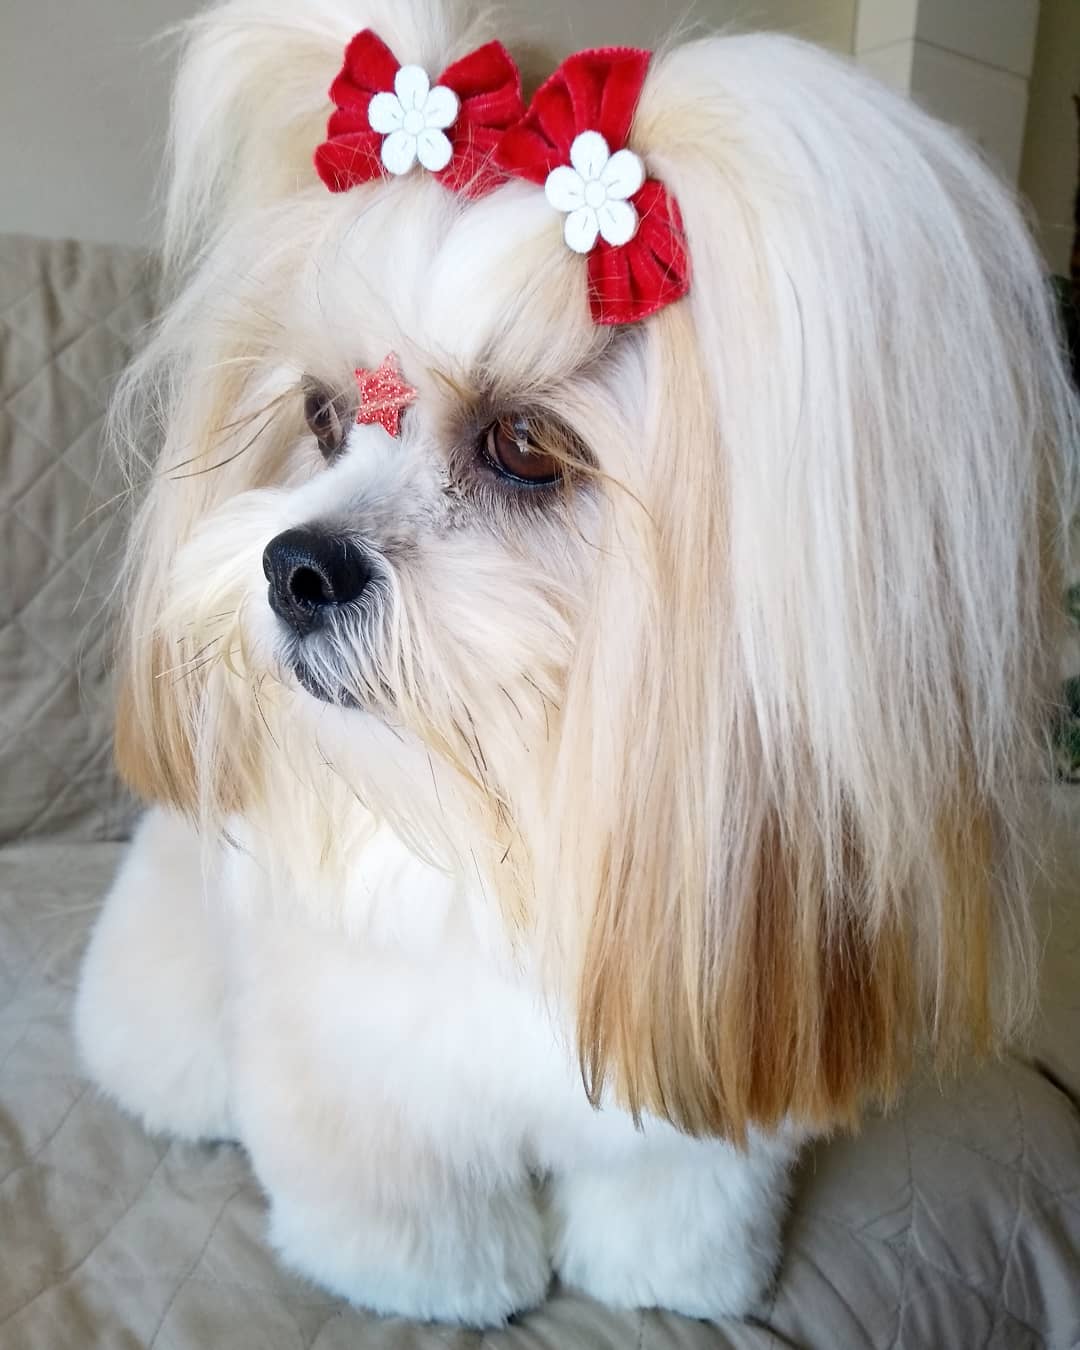 A Lhasa Apso wearing a red pony tail on top of its head while sitting on the couch